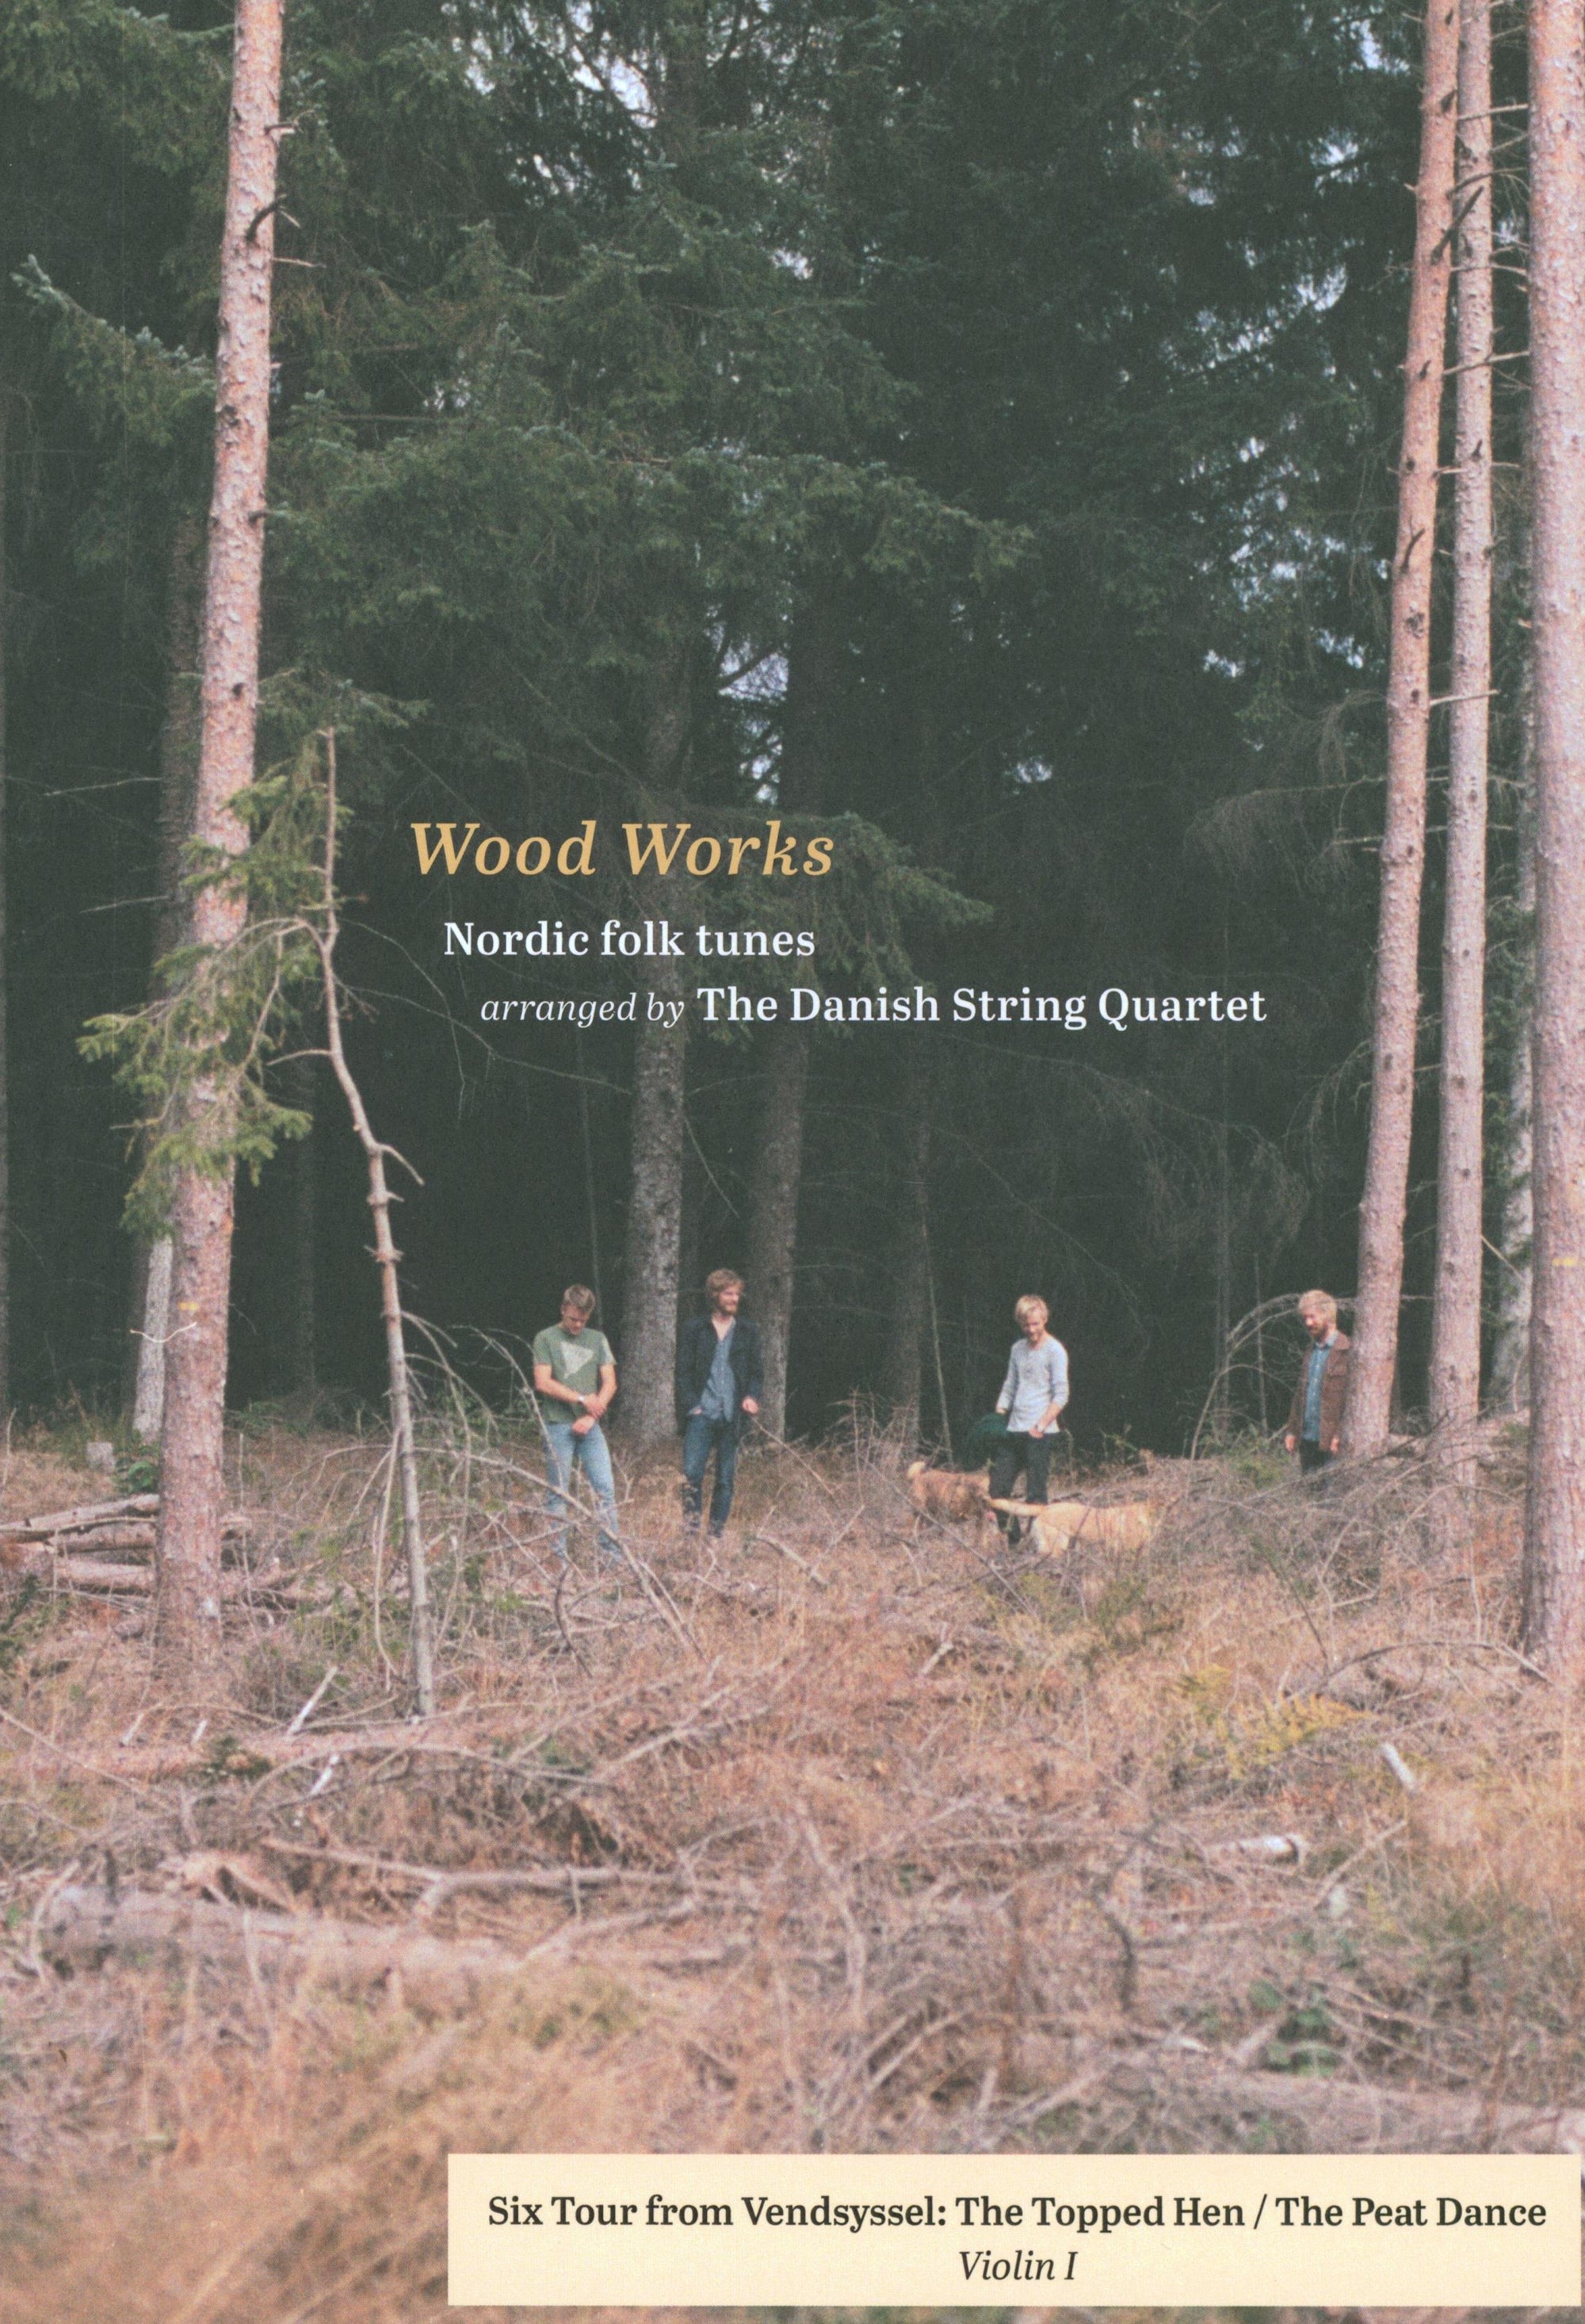 Wood Works – Six Tour from Vendsyssel: The Topped Hen / The Peat Dance